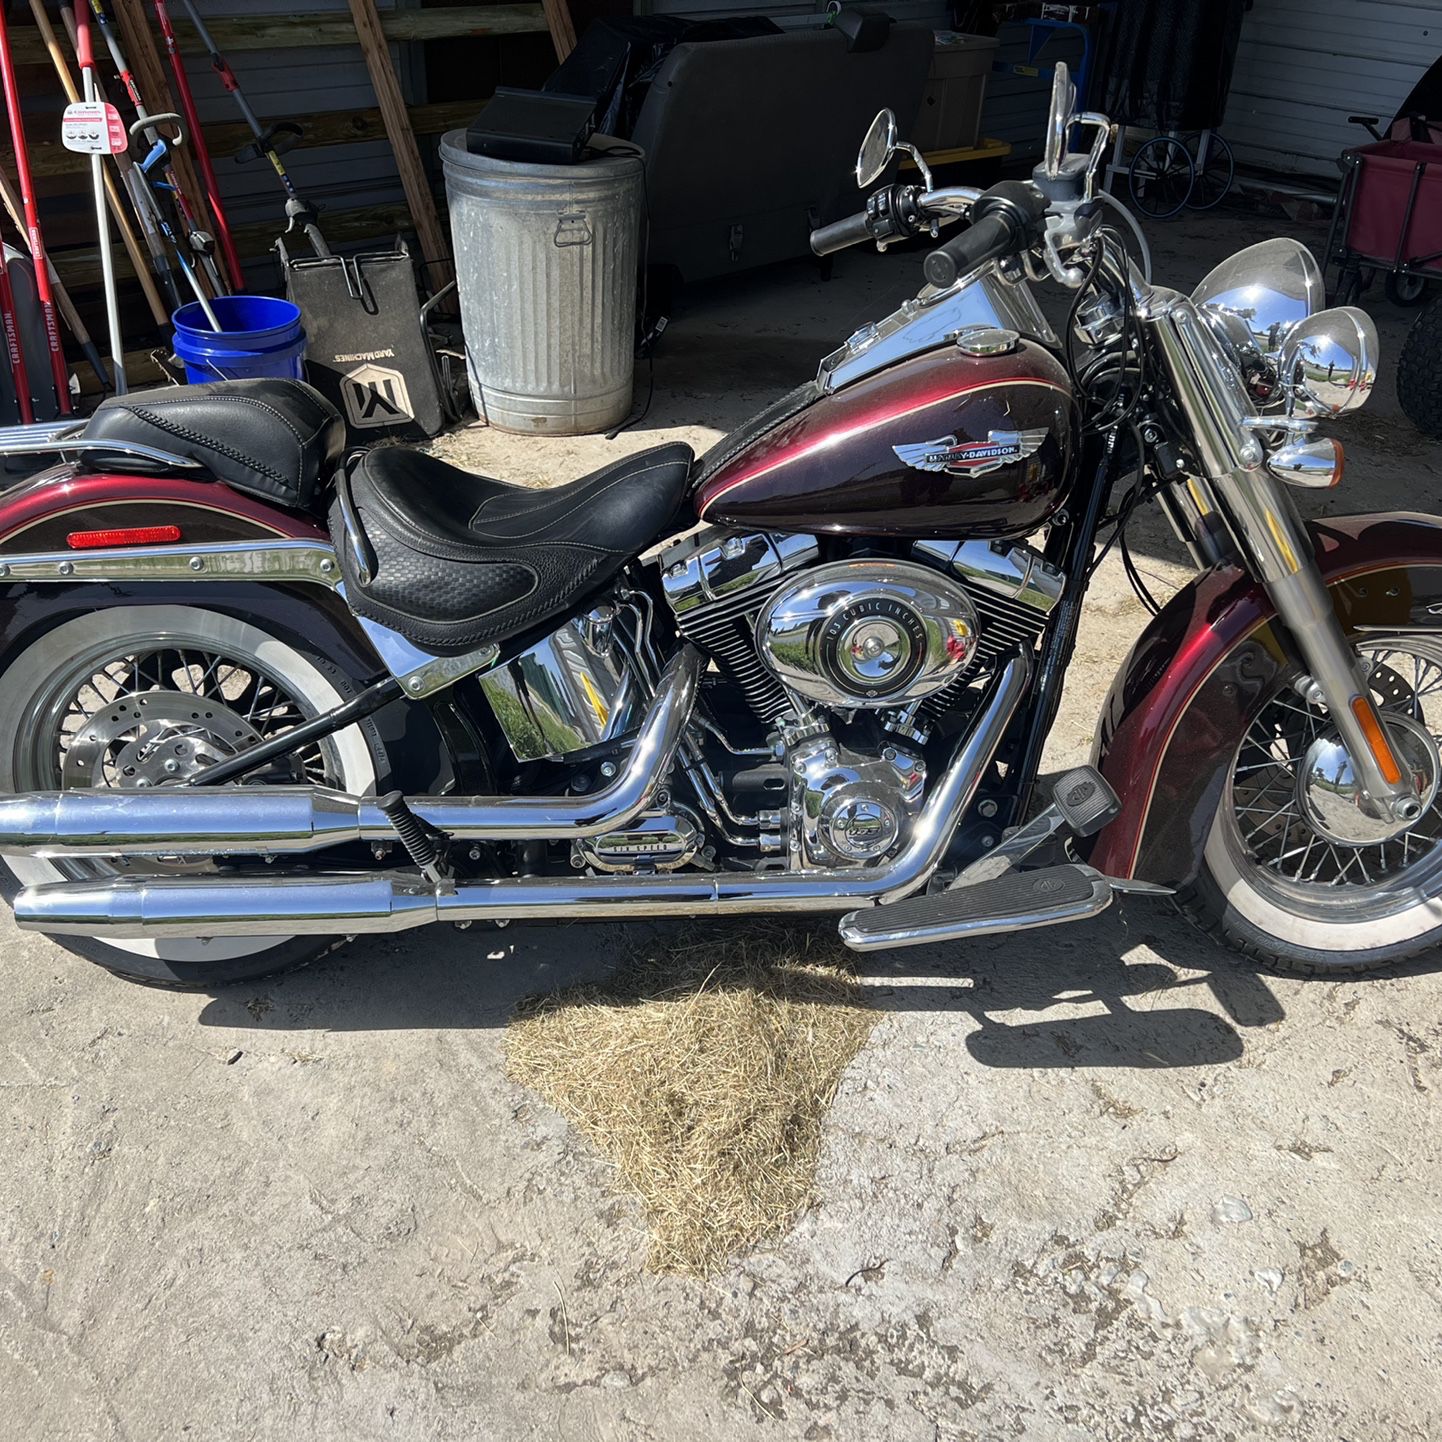 2015 Harley Davidson deluxe Softail deluxe